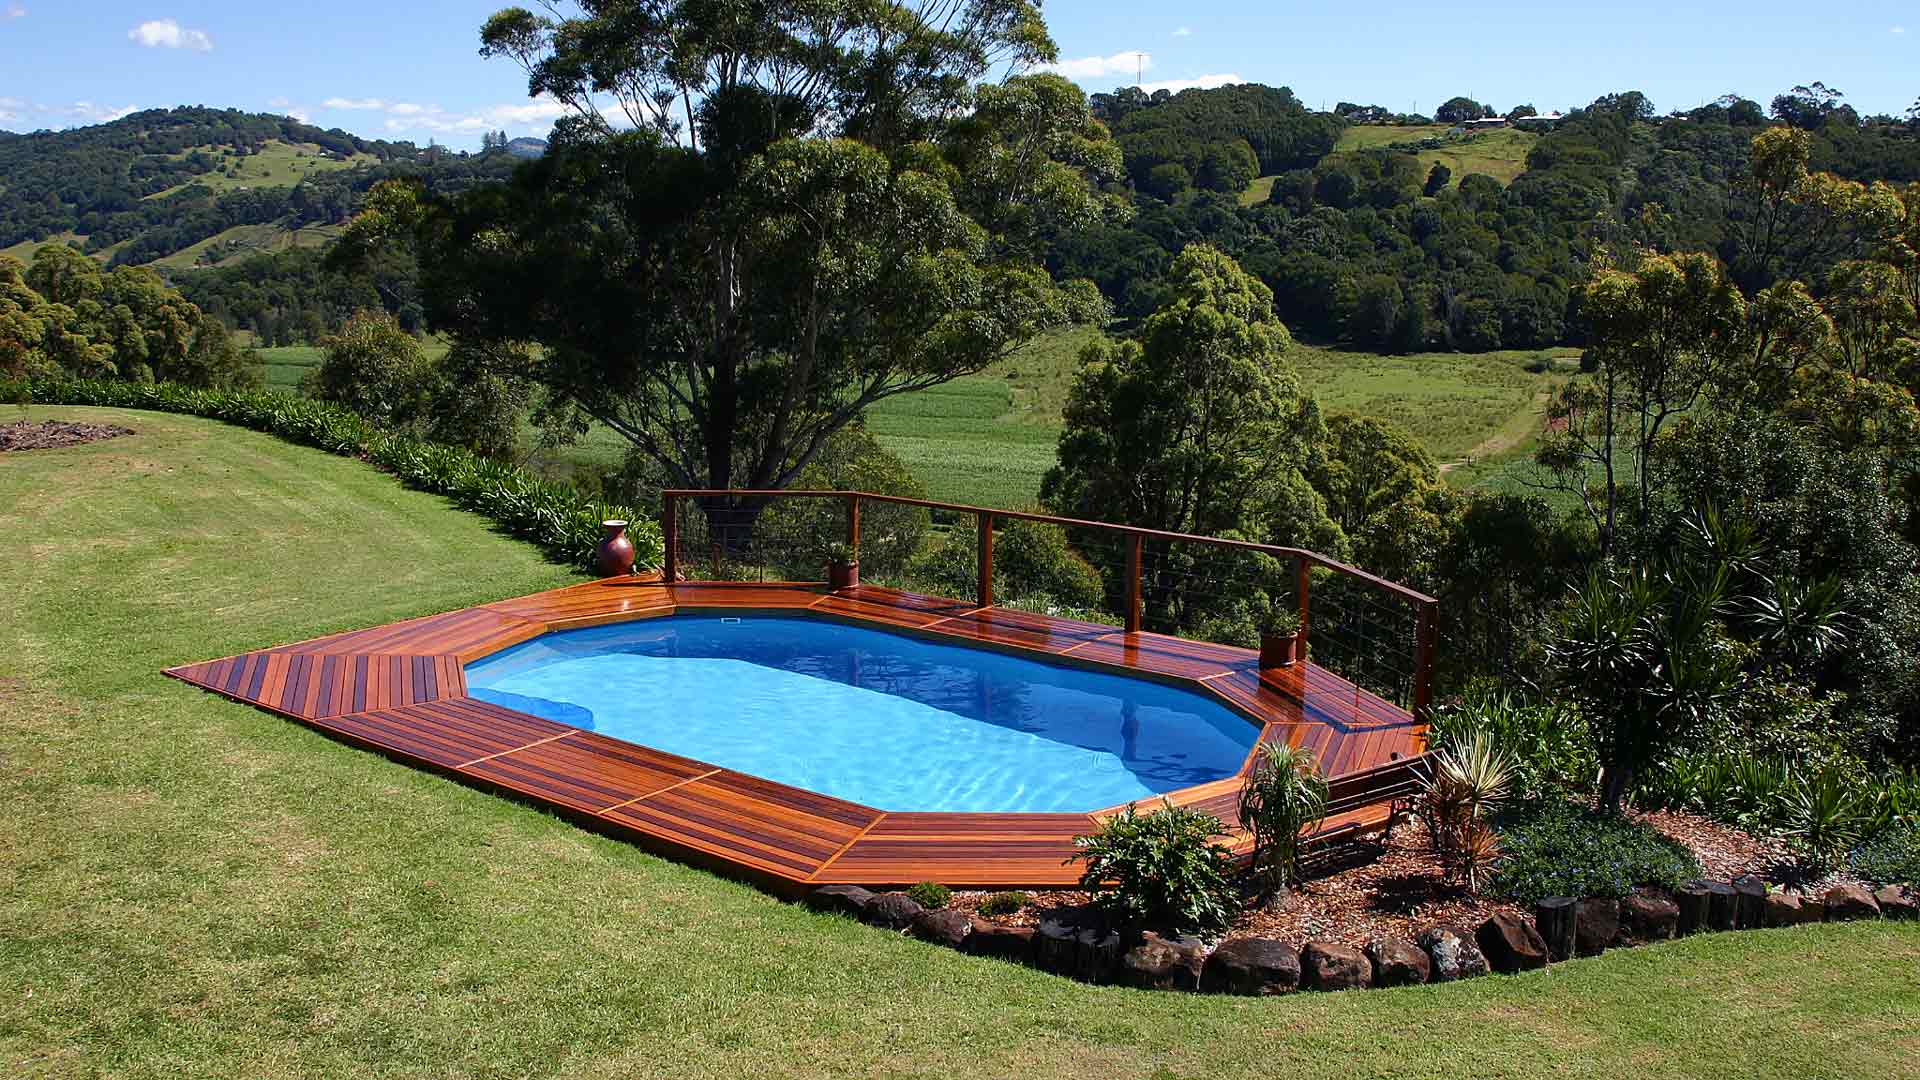 Above ground. Ground Pool Deck. Pool for Farm. In-ground, larger Pool.